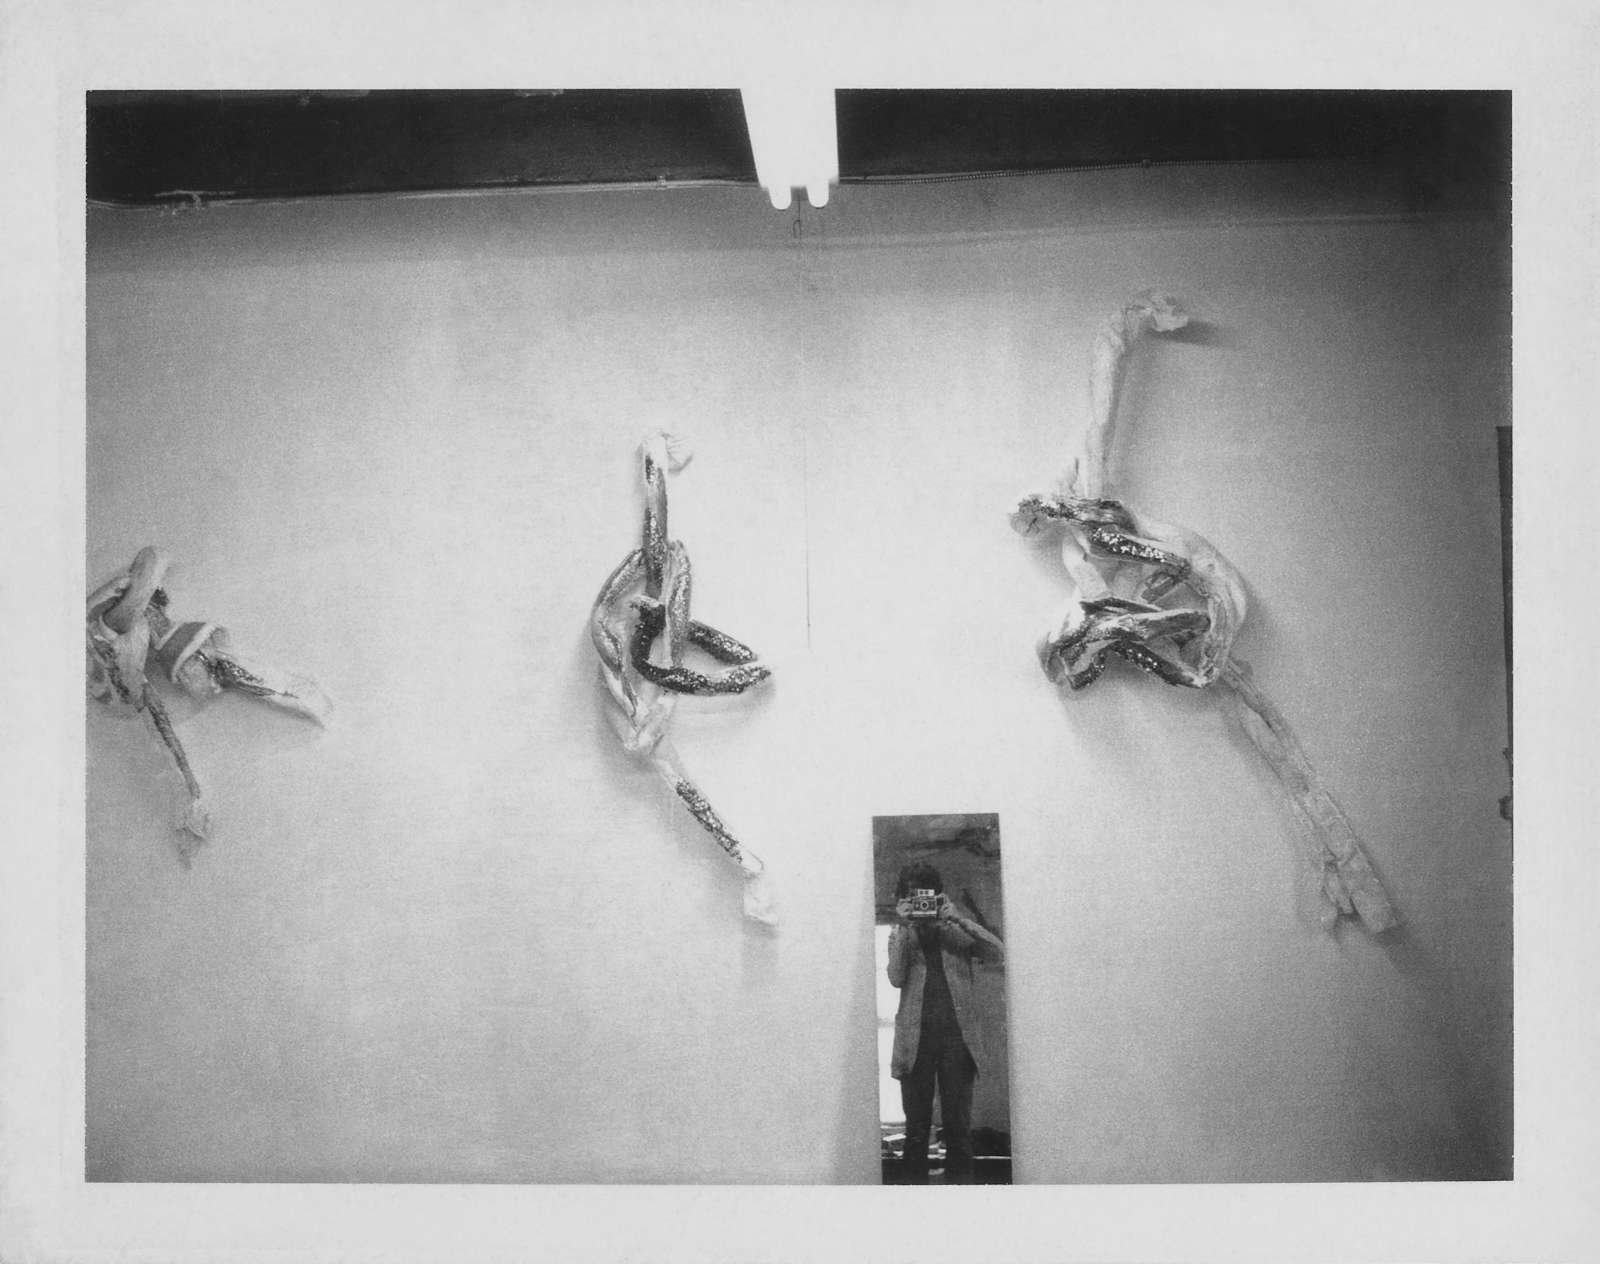 Lynda Benglis ‘Sparkle knots’ in the artist’s Baxter Street studio, New York City, 1972 © Lynda Benglis. Licensed by VAGA at Artists Rights Society (ARS), NY. Courtesy the artist, Pace Gallery and Thomas Dane Gallery. Photo: Lynda Benglis.